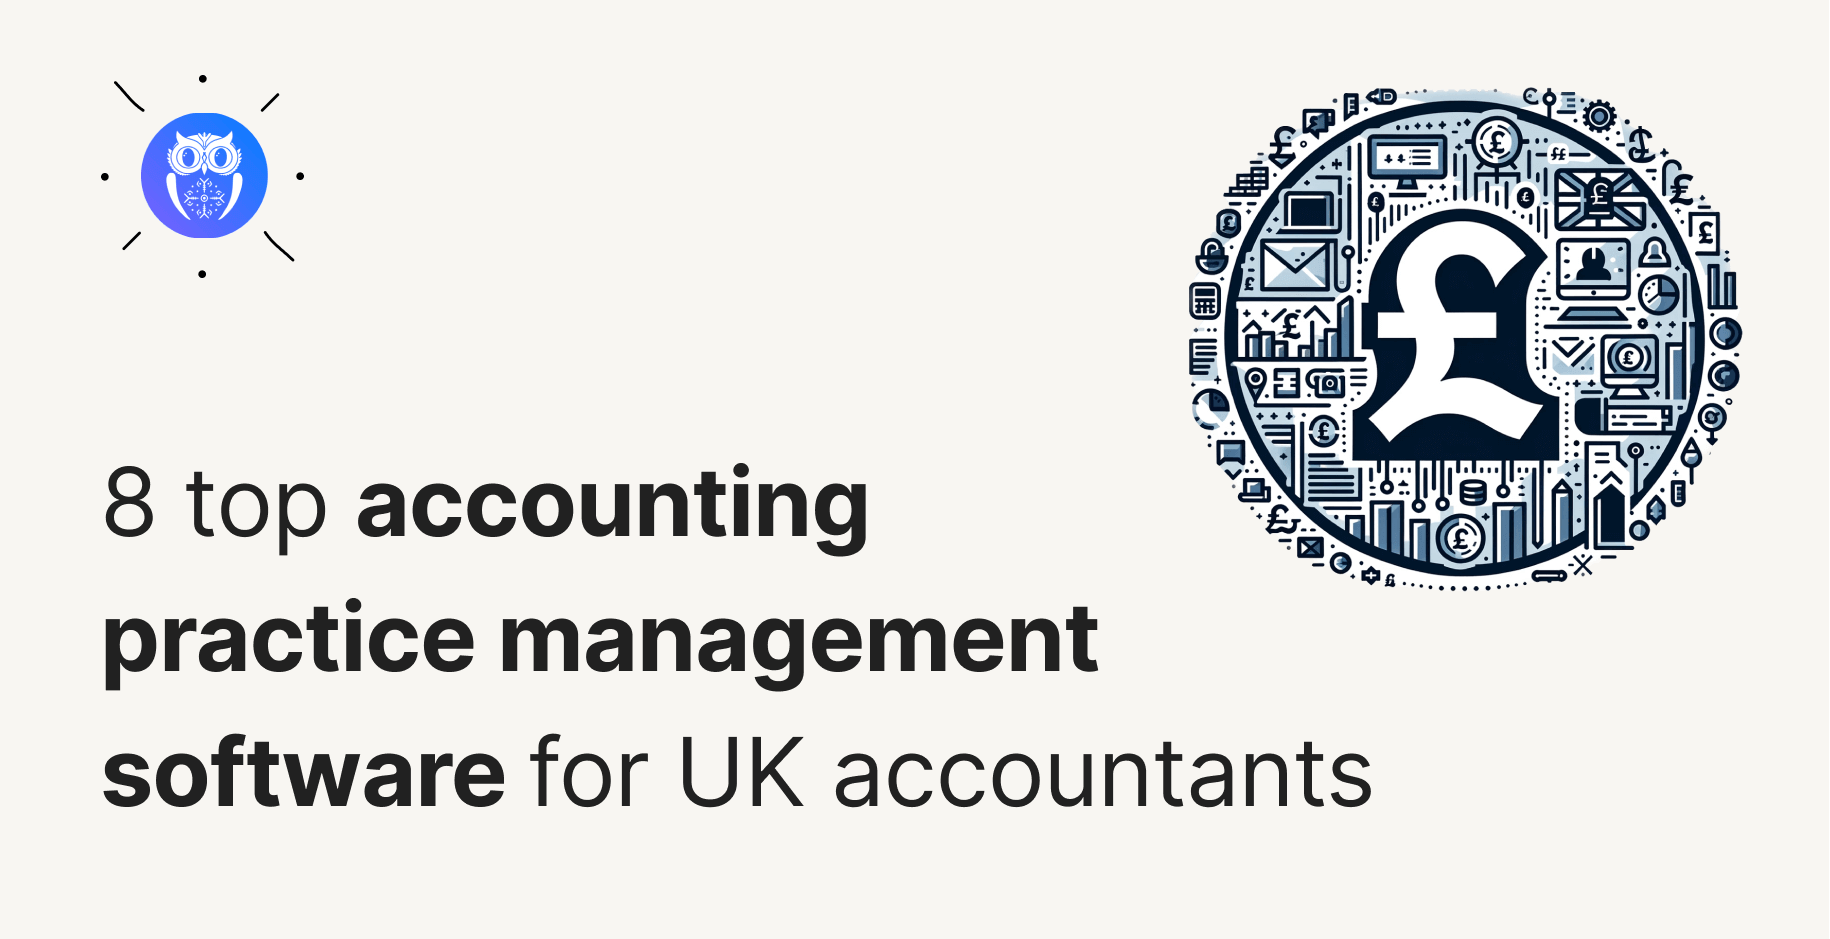 UK best accounting practice management software